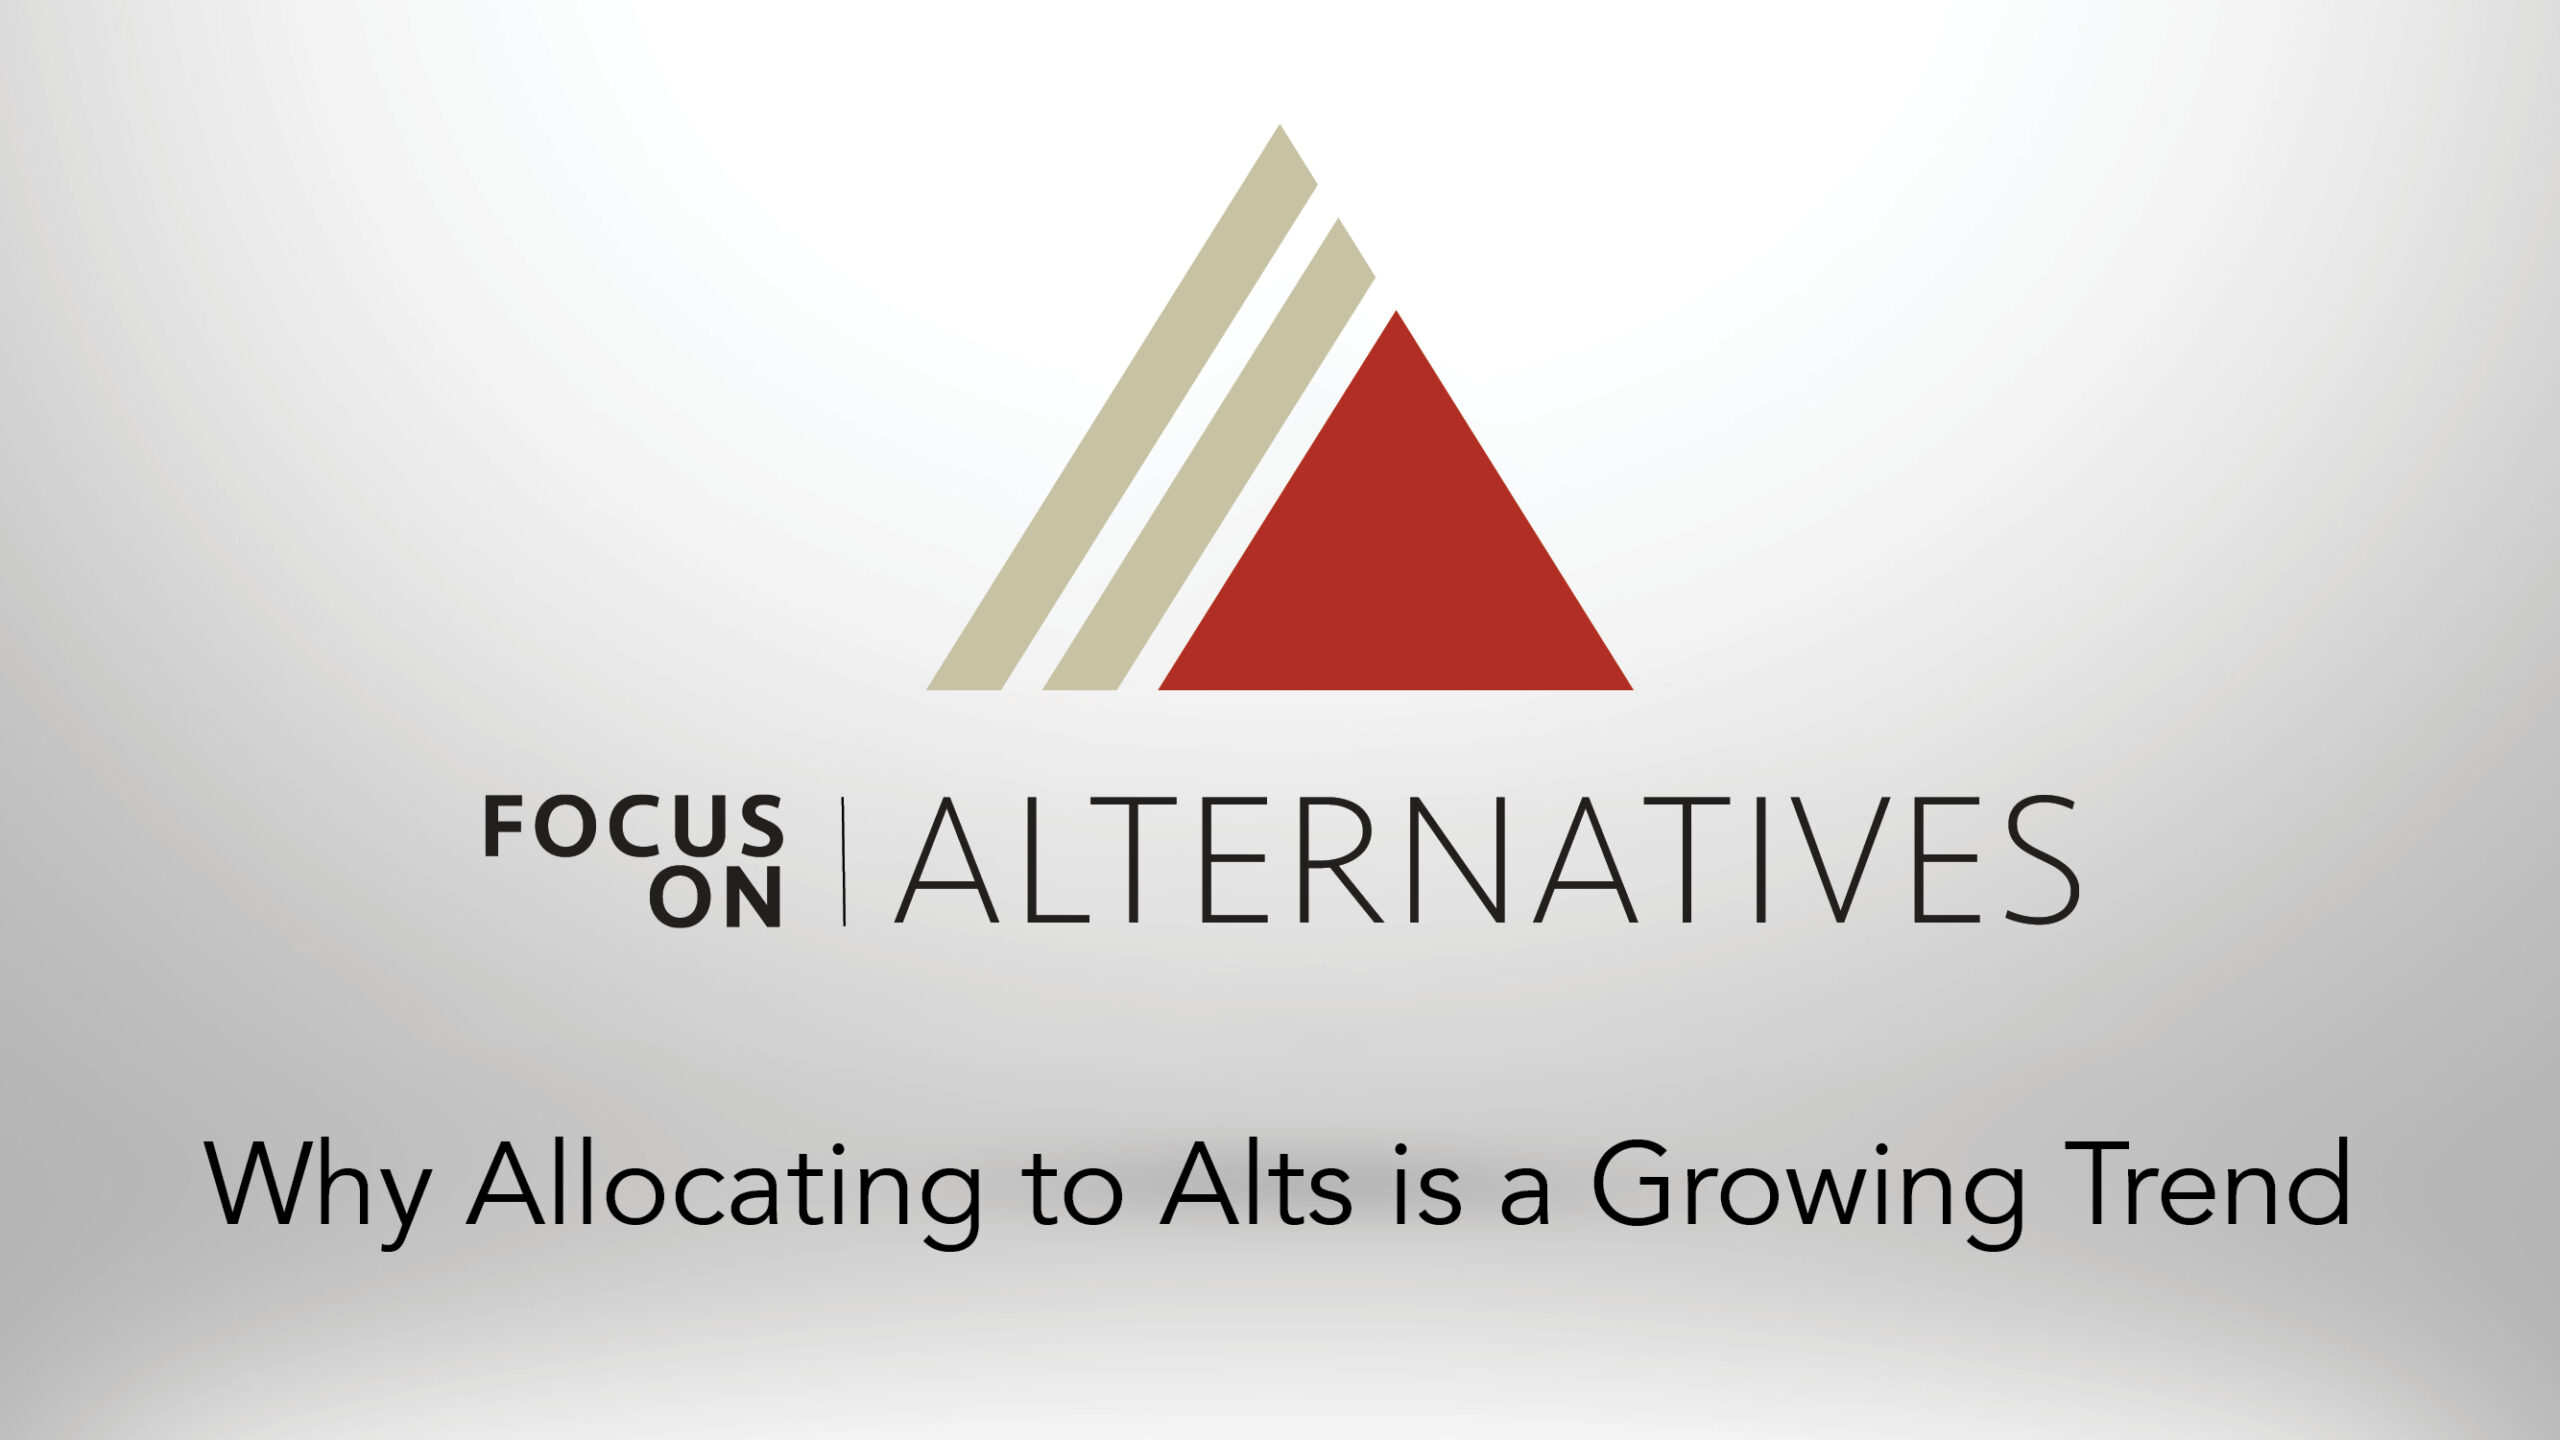 ADISA Video: Why Allocating to Alts is a Growing Trend